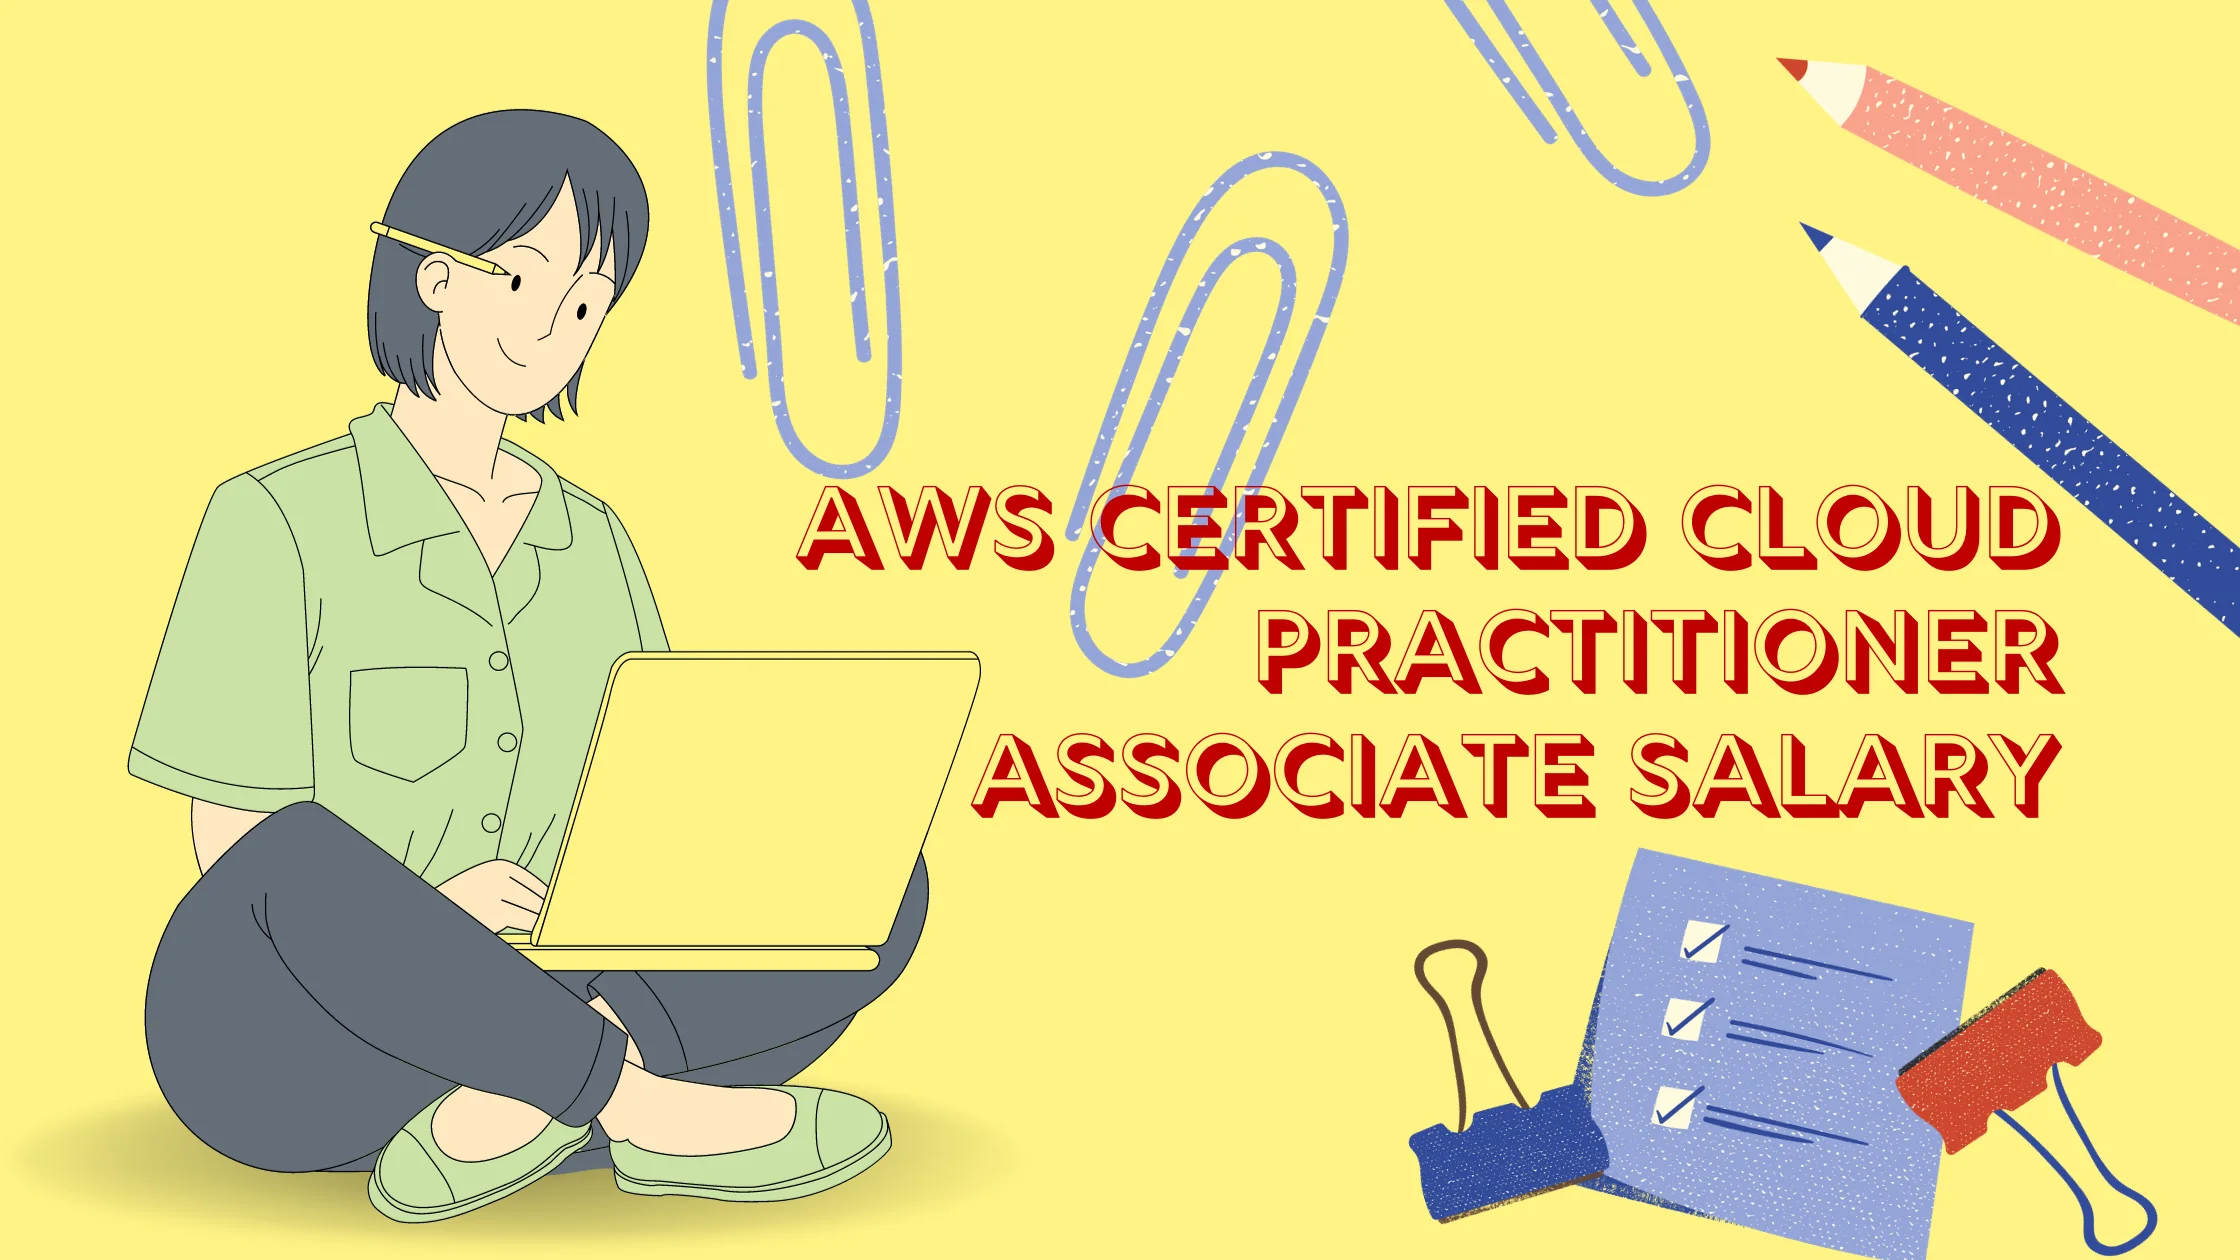 AWS Certified Cloud Practitioner Associate Salary success with preparation